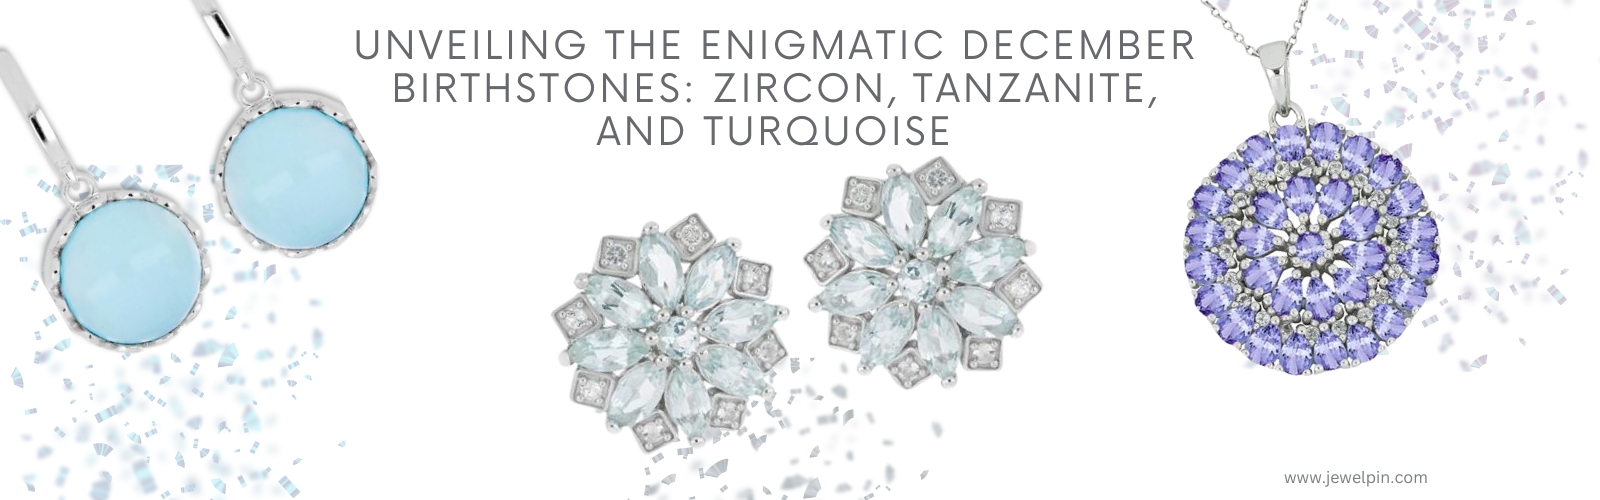 unveiling the enigmatic december birthstones zircon tanzanite and turquoise